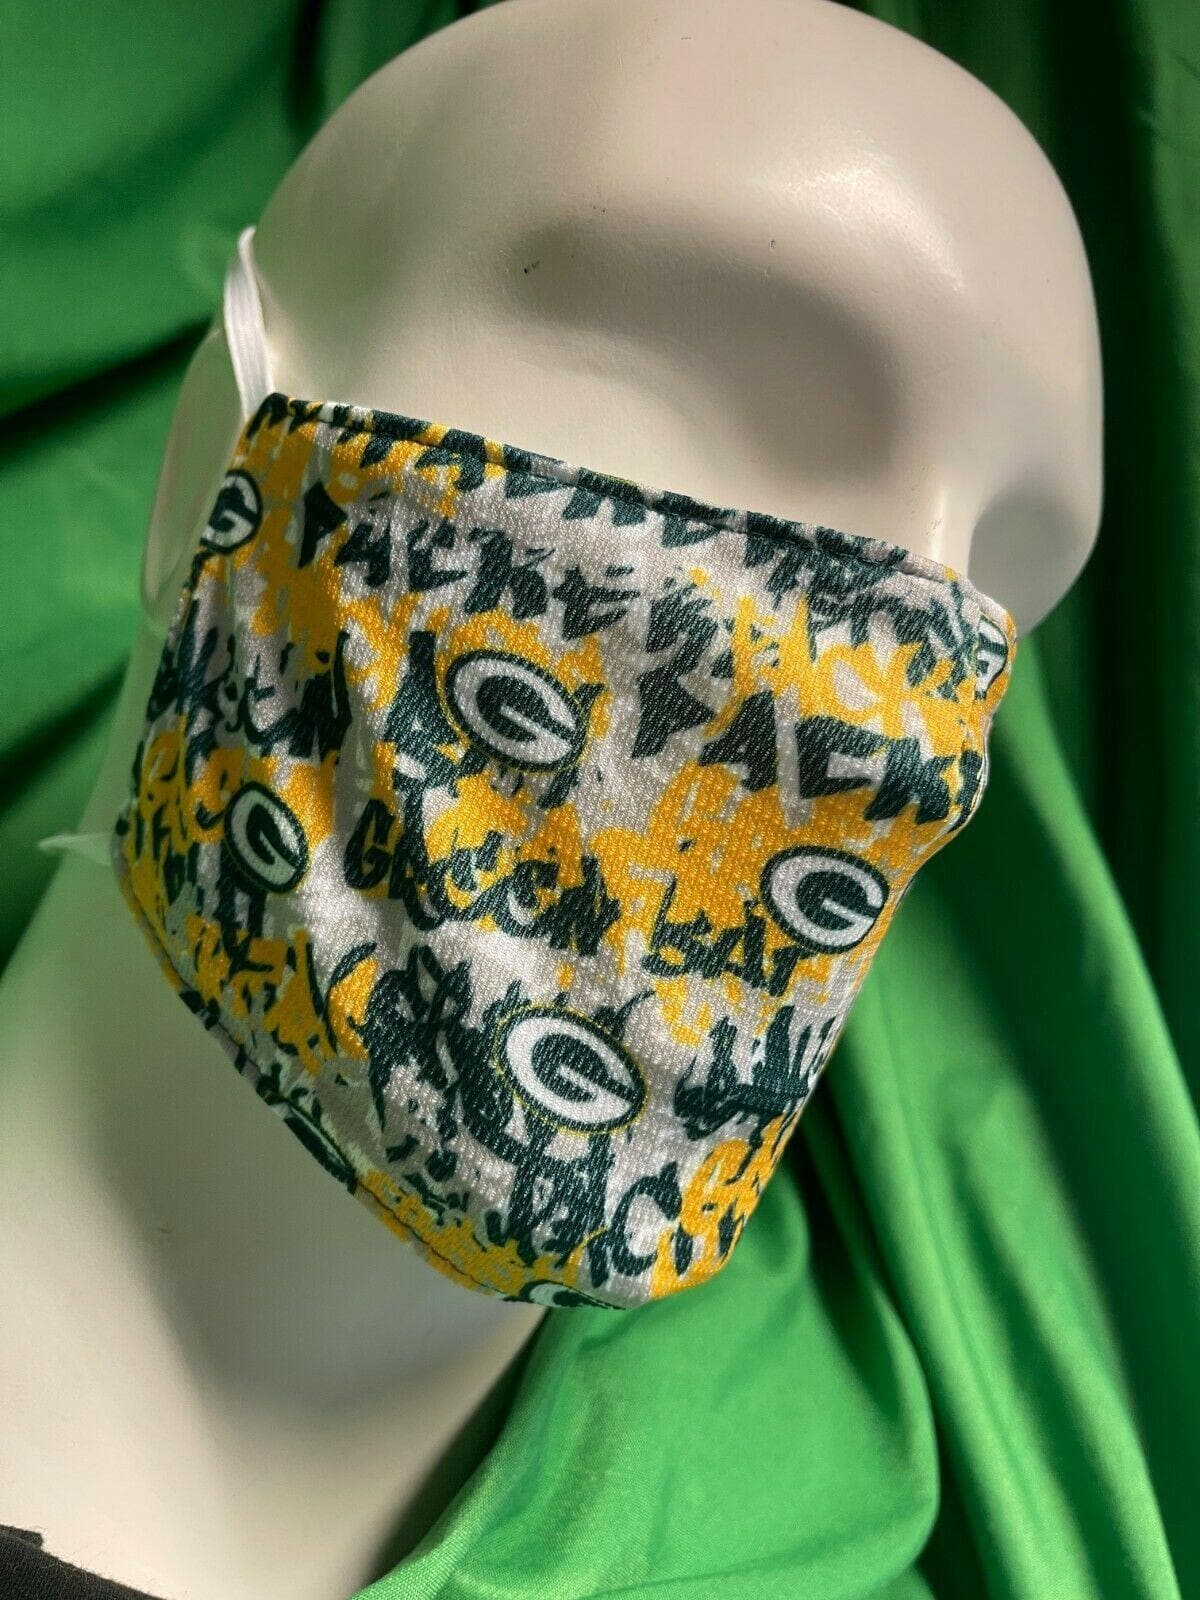 NFL Green Bay Packers Face Cover Mask Twin Elastic Around Head NWT